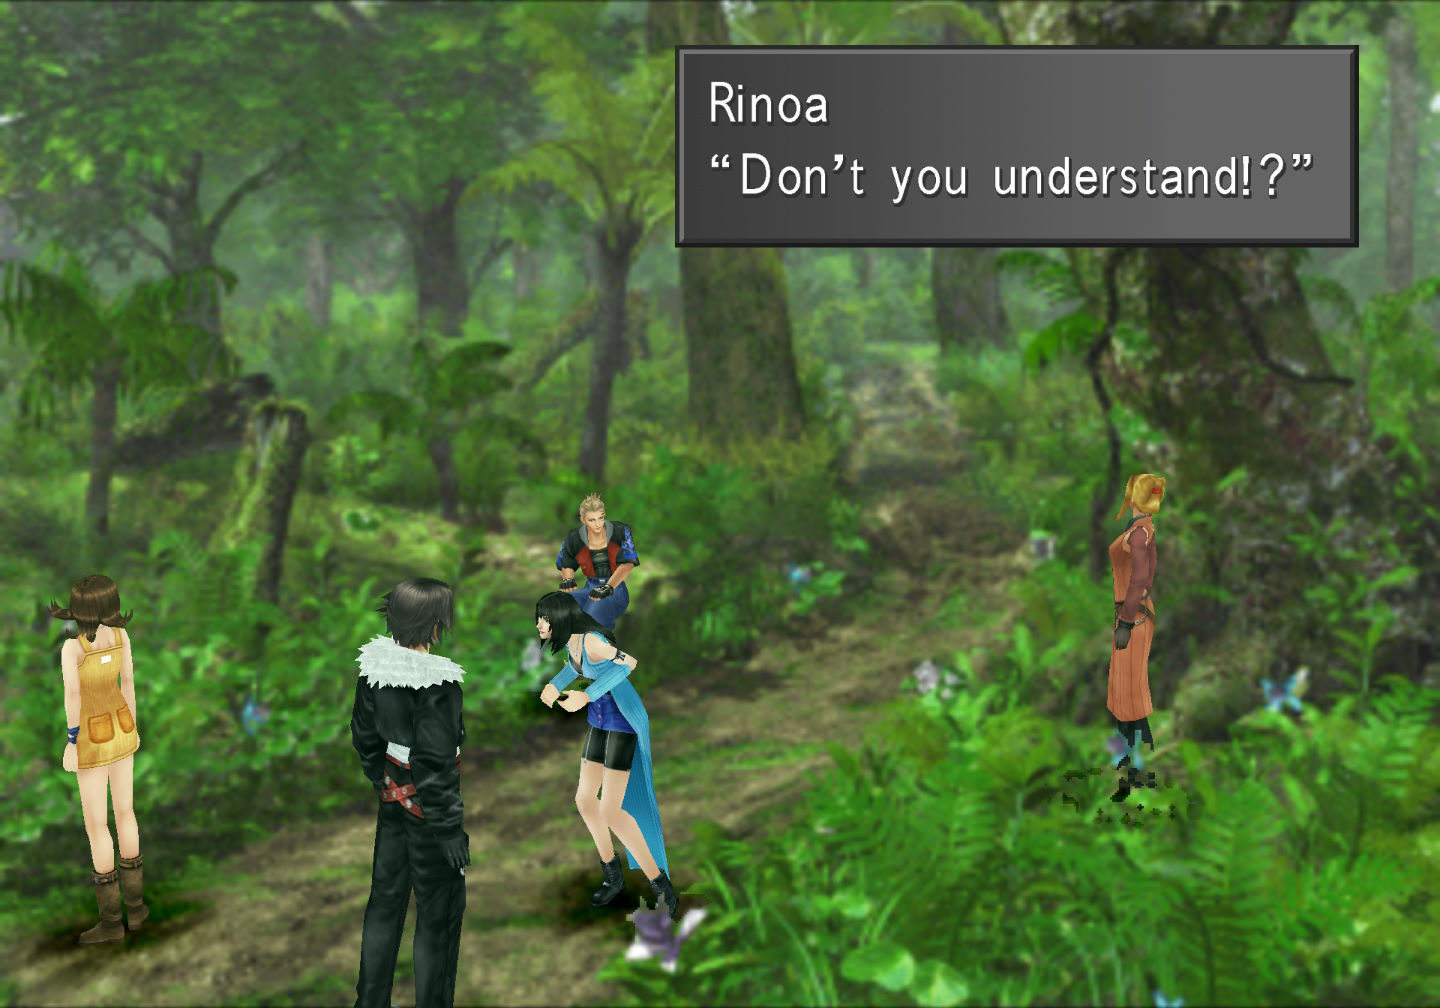 Rinoa is hunched over like a goblin with her shoulders raised, her hair lowered, and her elbows flared back.